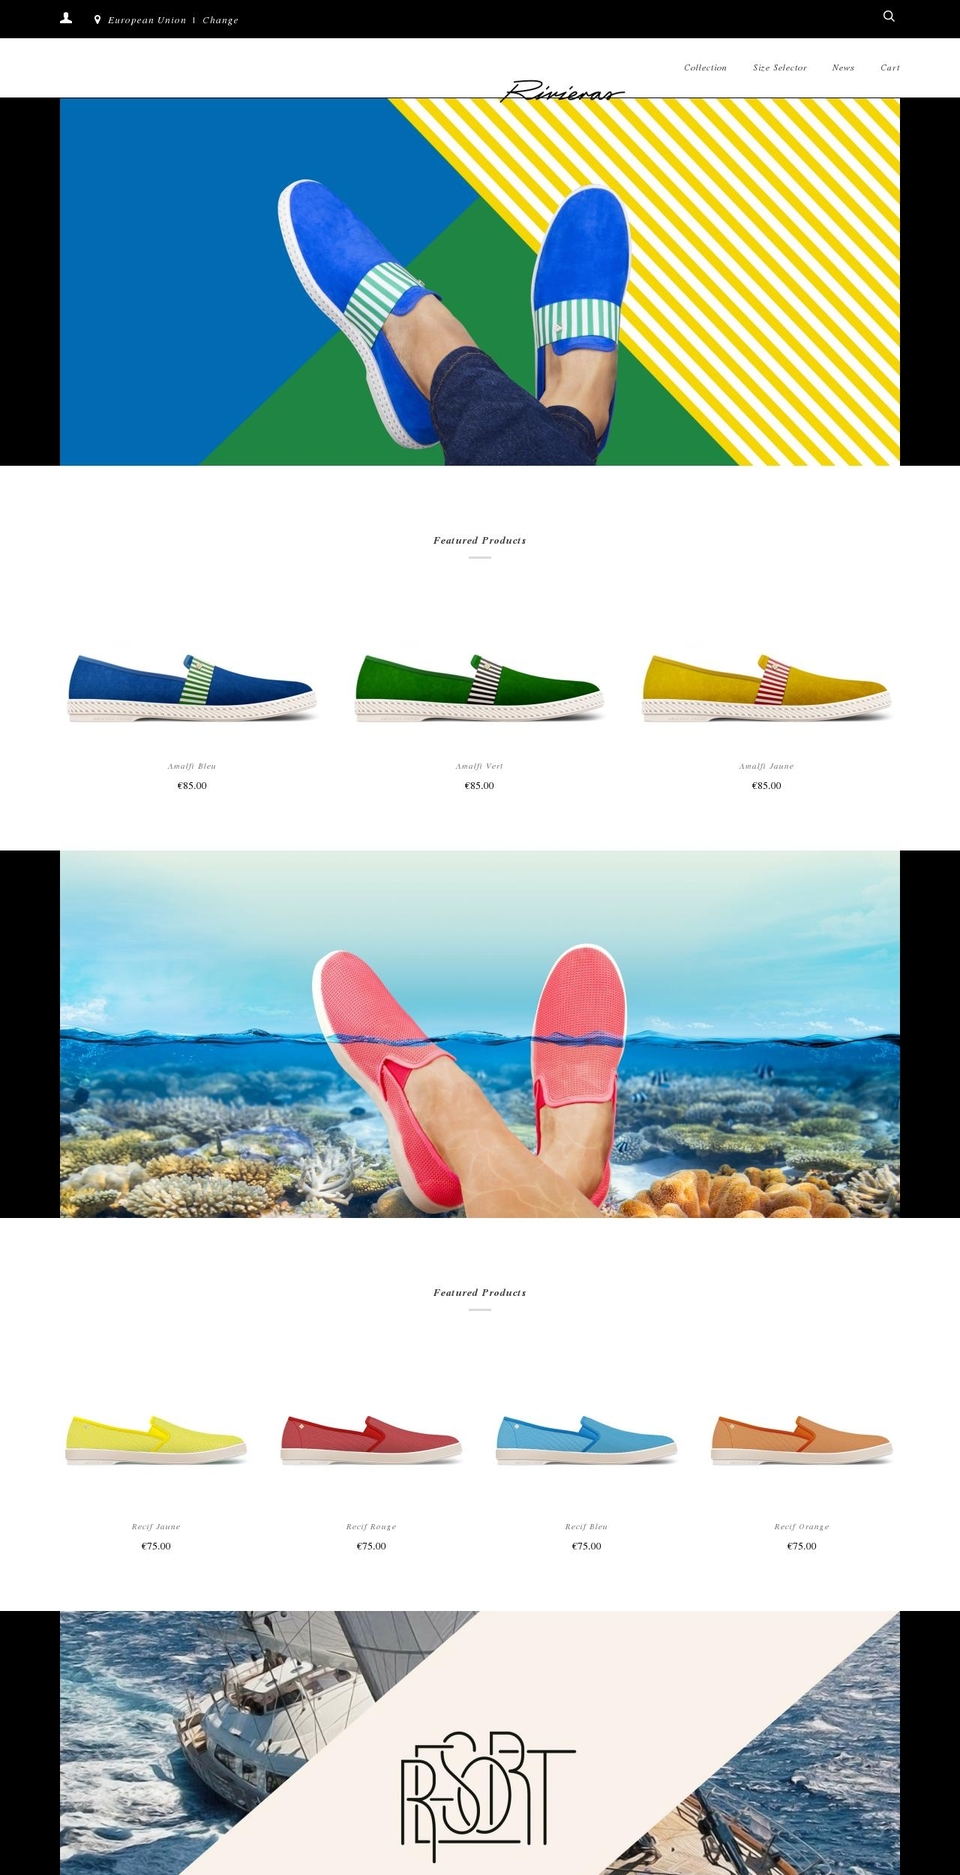 Rivieras [Plus]-TH-July-30-2018 Shopify theme site example rivieras-shoes.nl